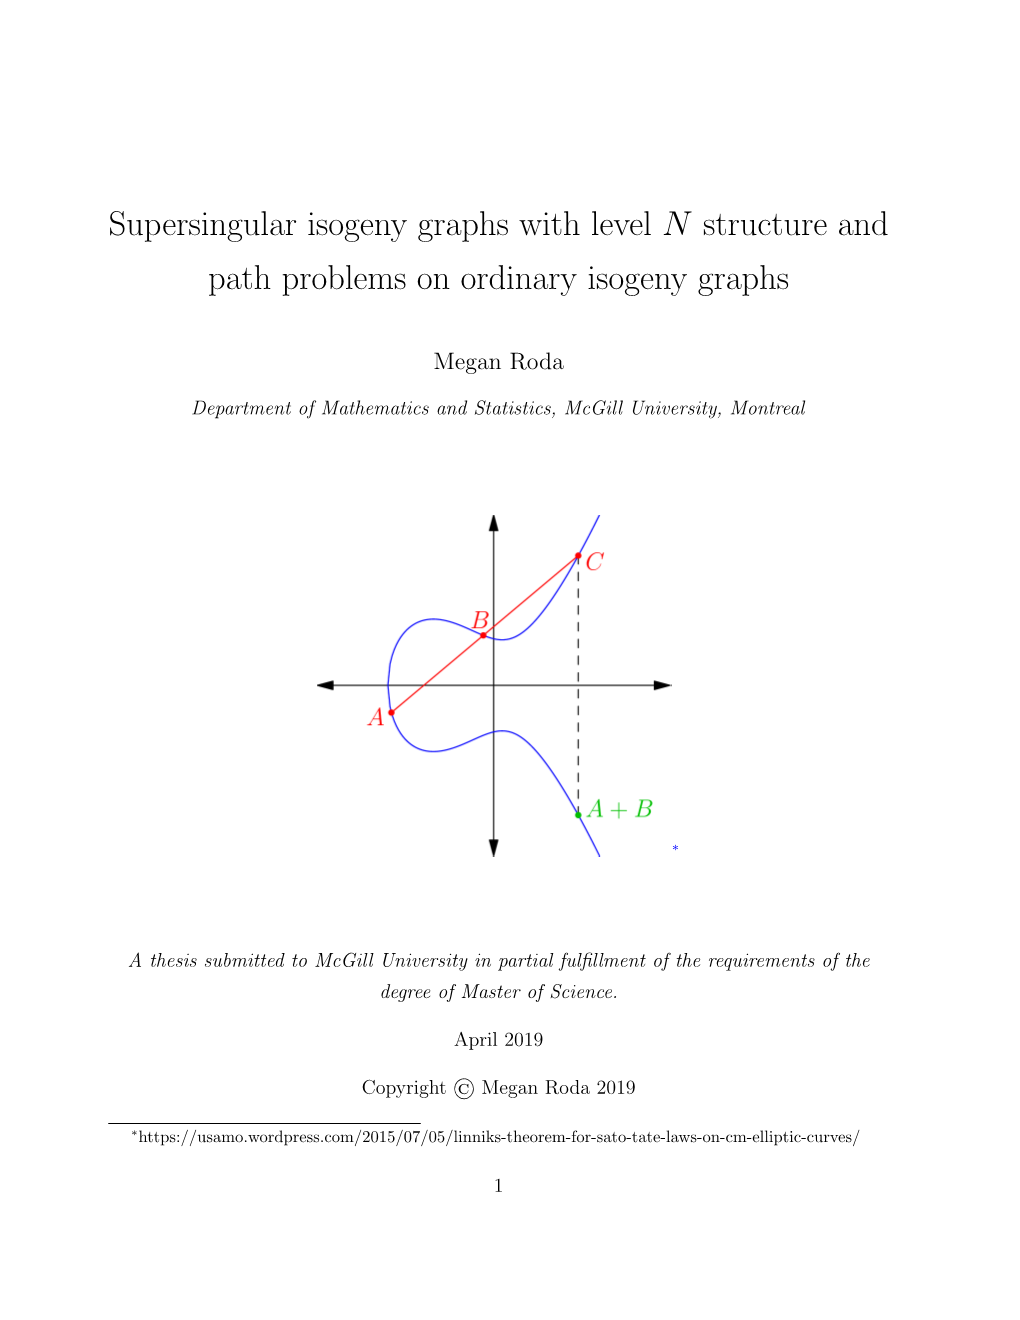 Supersingular Isogeny Graphs with Level N Structure and Path Problems on Ordinary Isogeny Graphs